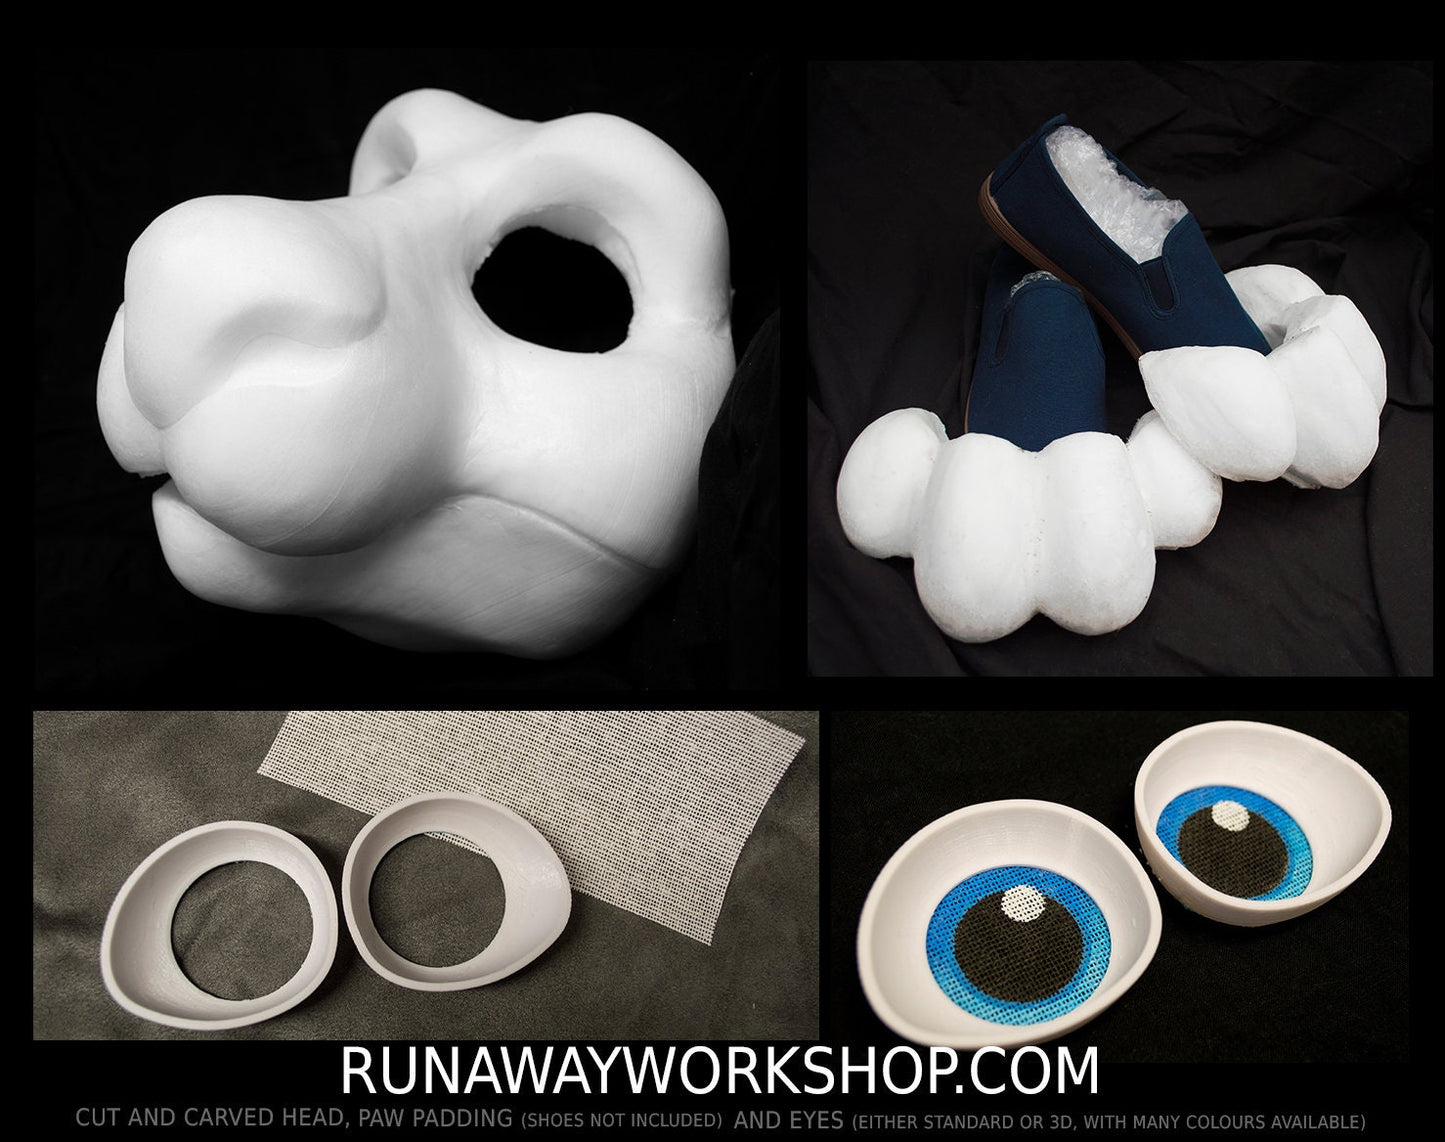 Drekkubus bundle deal: cut and carved head base, Eyes and Feet padding, for costumes mascots and fursuits.